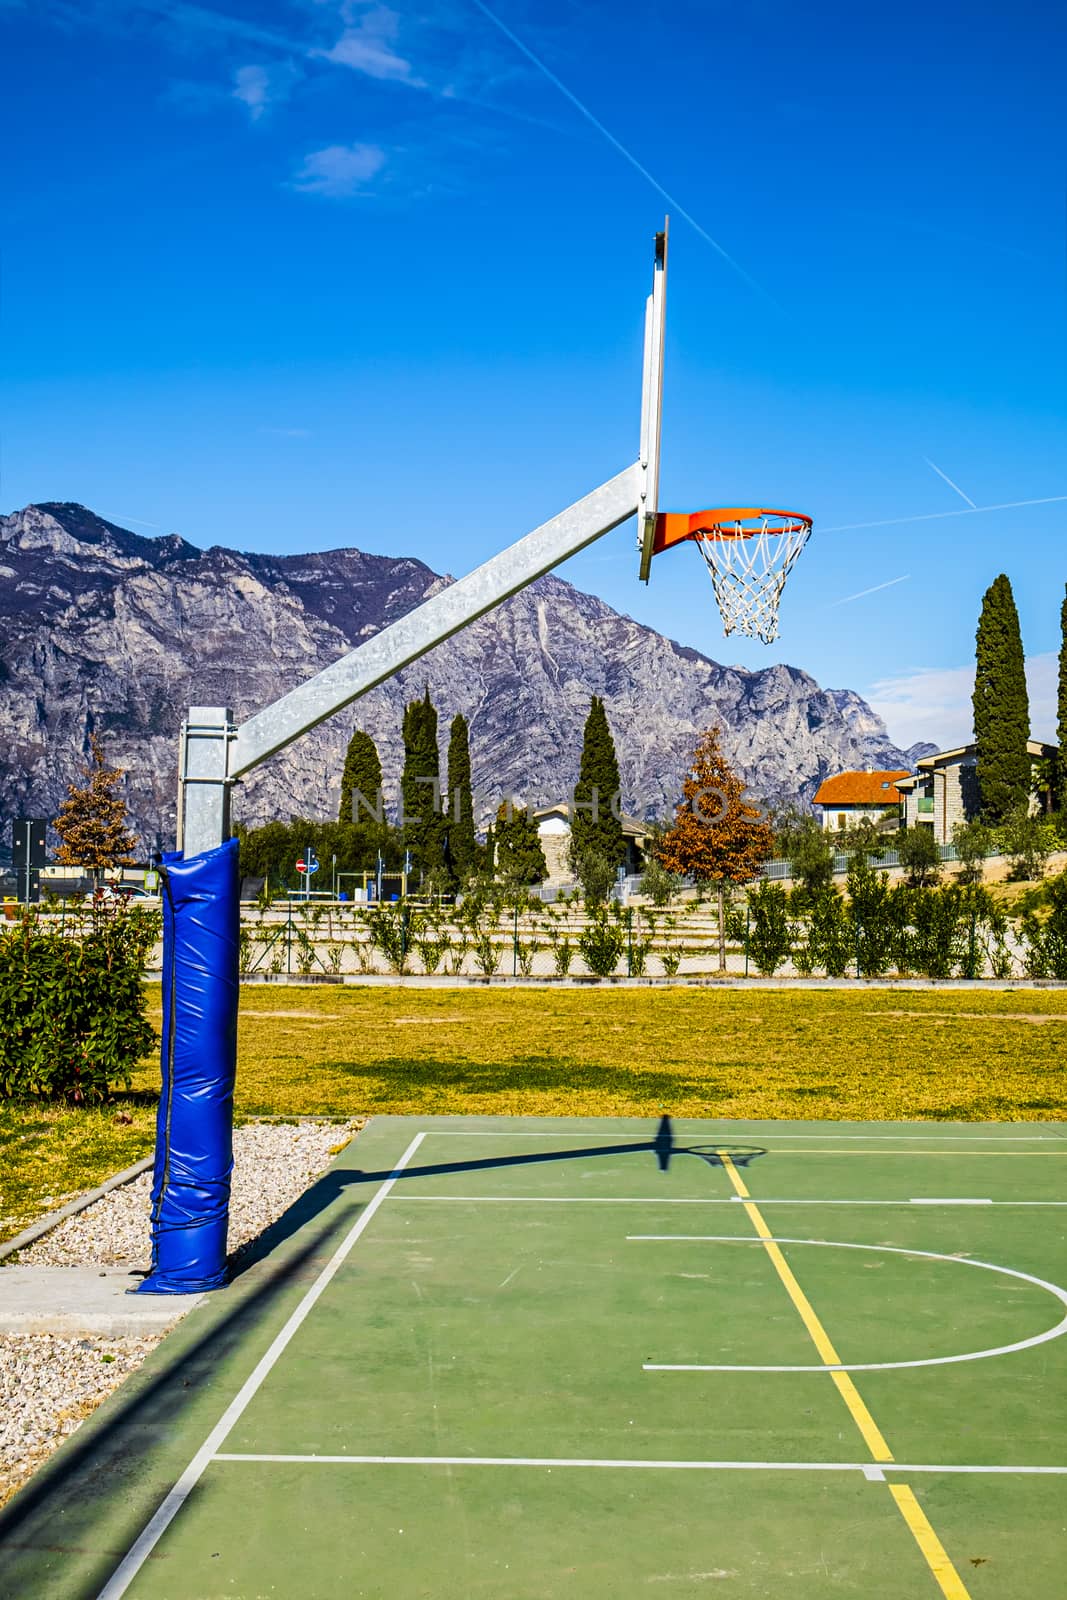 Deserted sports field on the shores of Lake Garda in Italy.